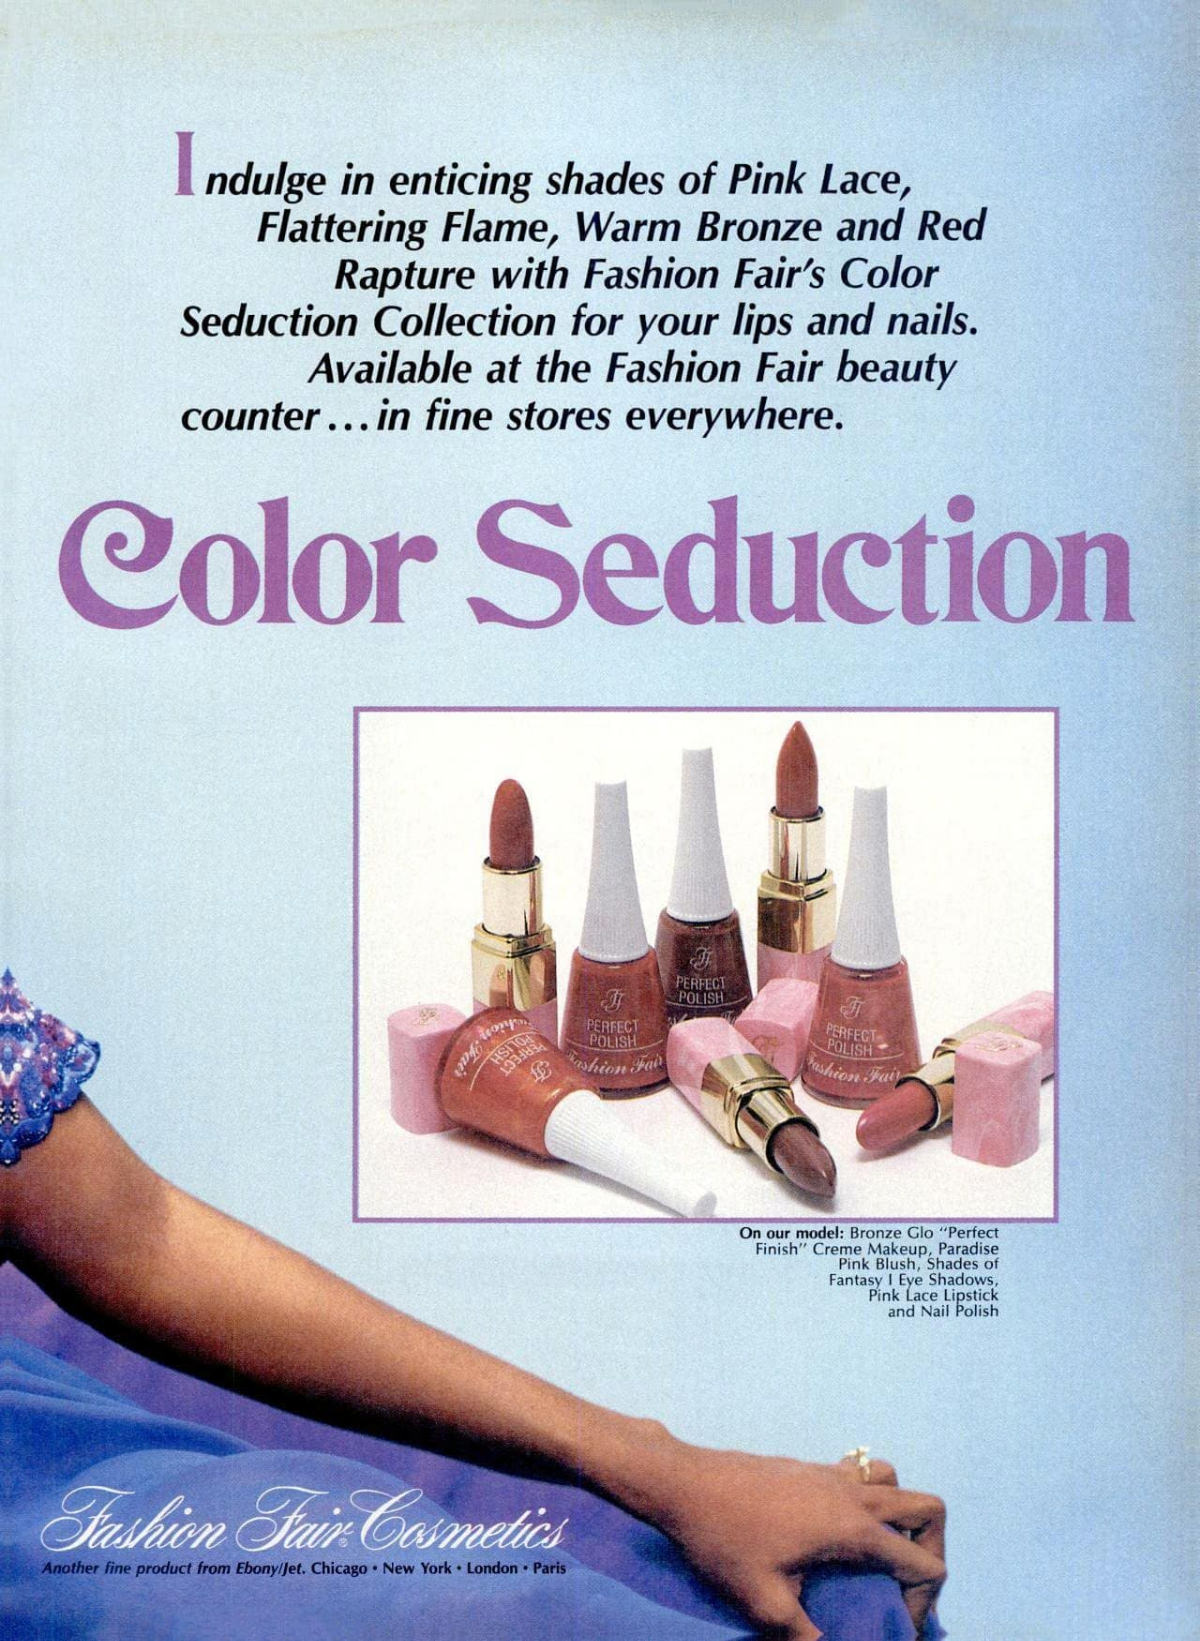 Beautiful Vintage Nail Polish Ads from the 1980s